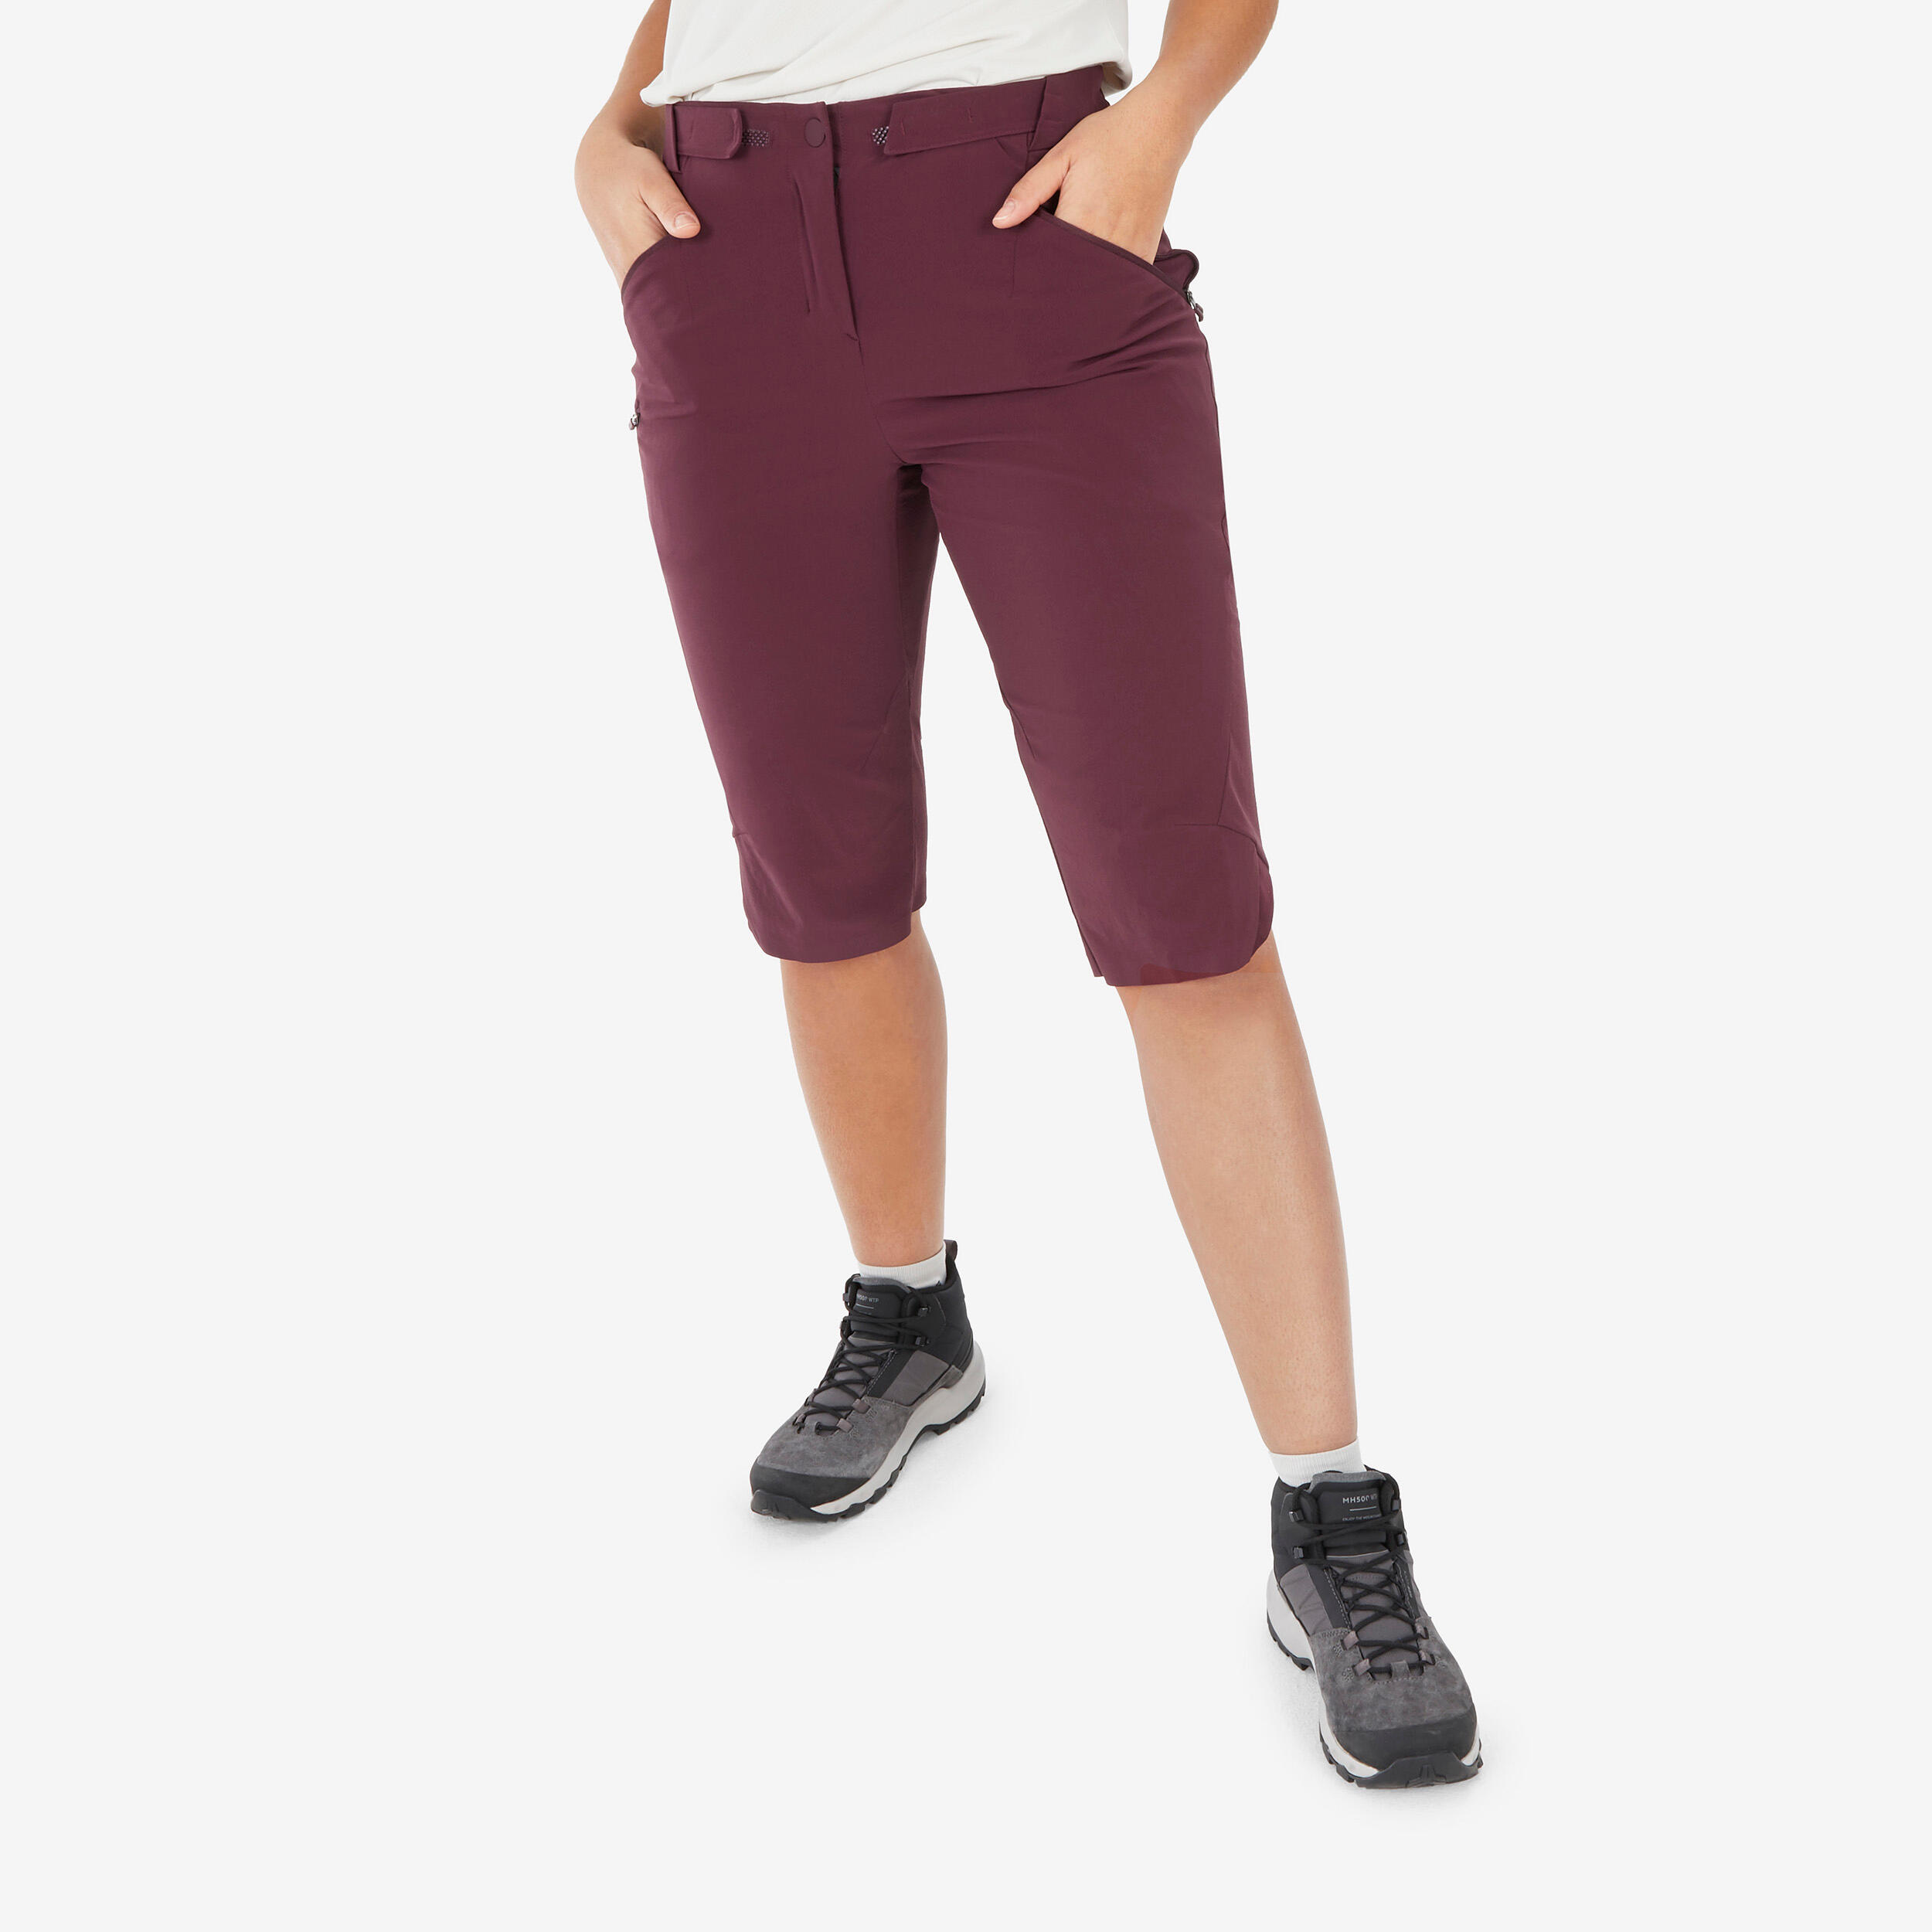 Women's hiking trousers - MH500 1/5